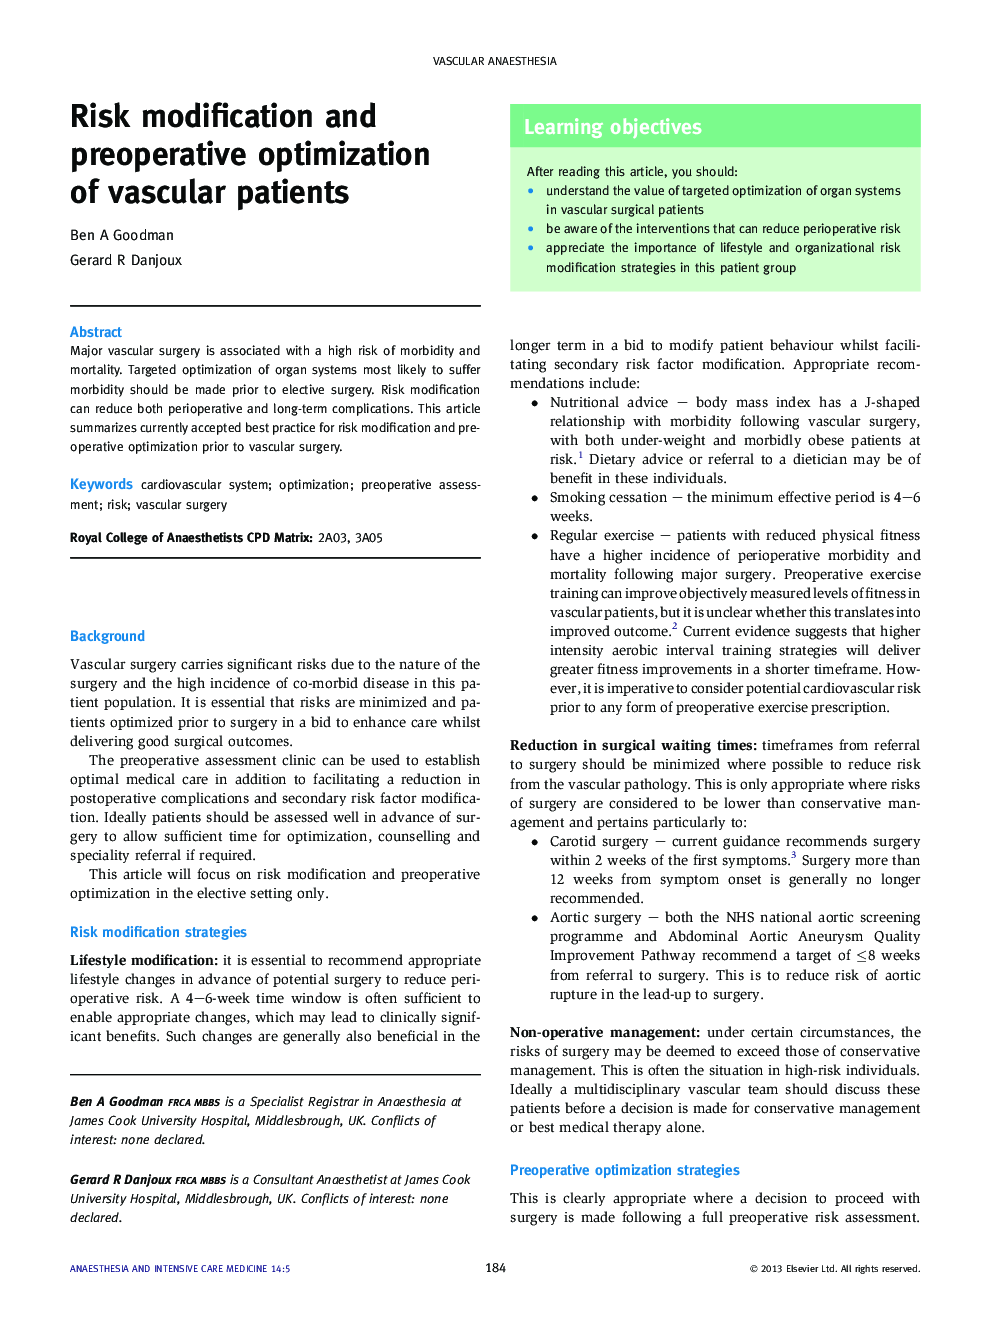 Risk modification and preoperative optimization of vascular patients